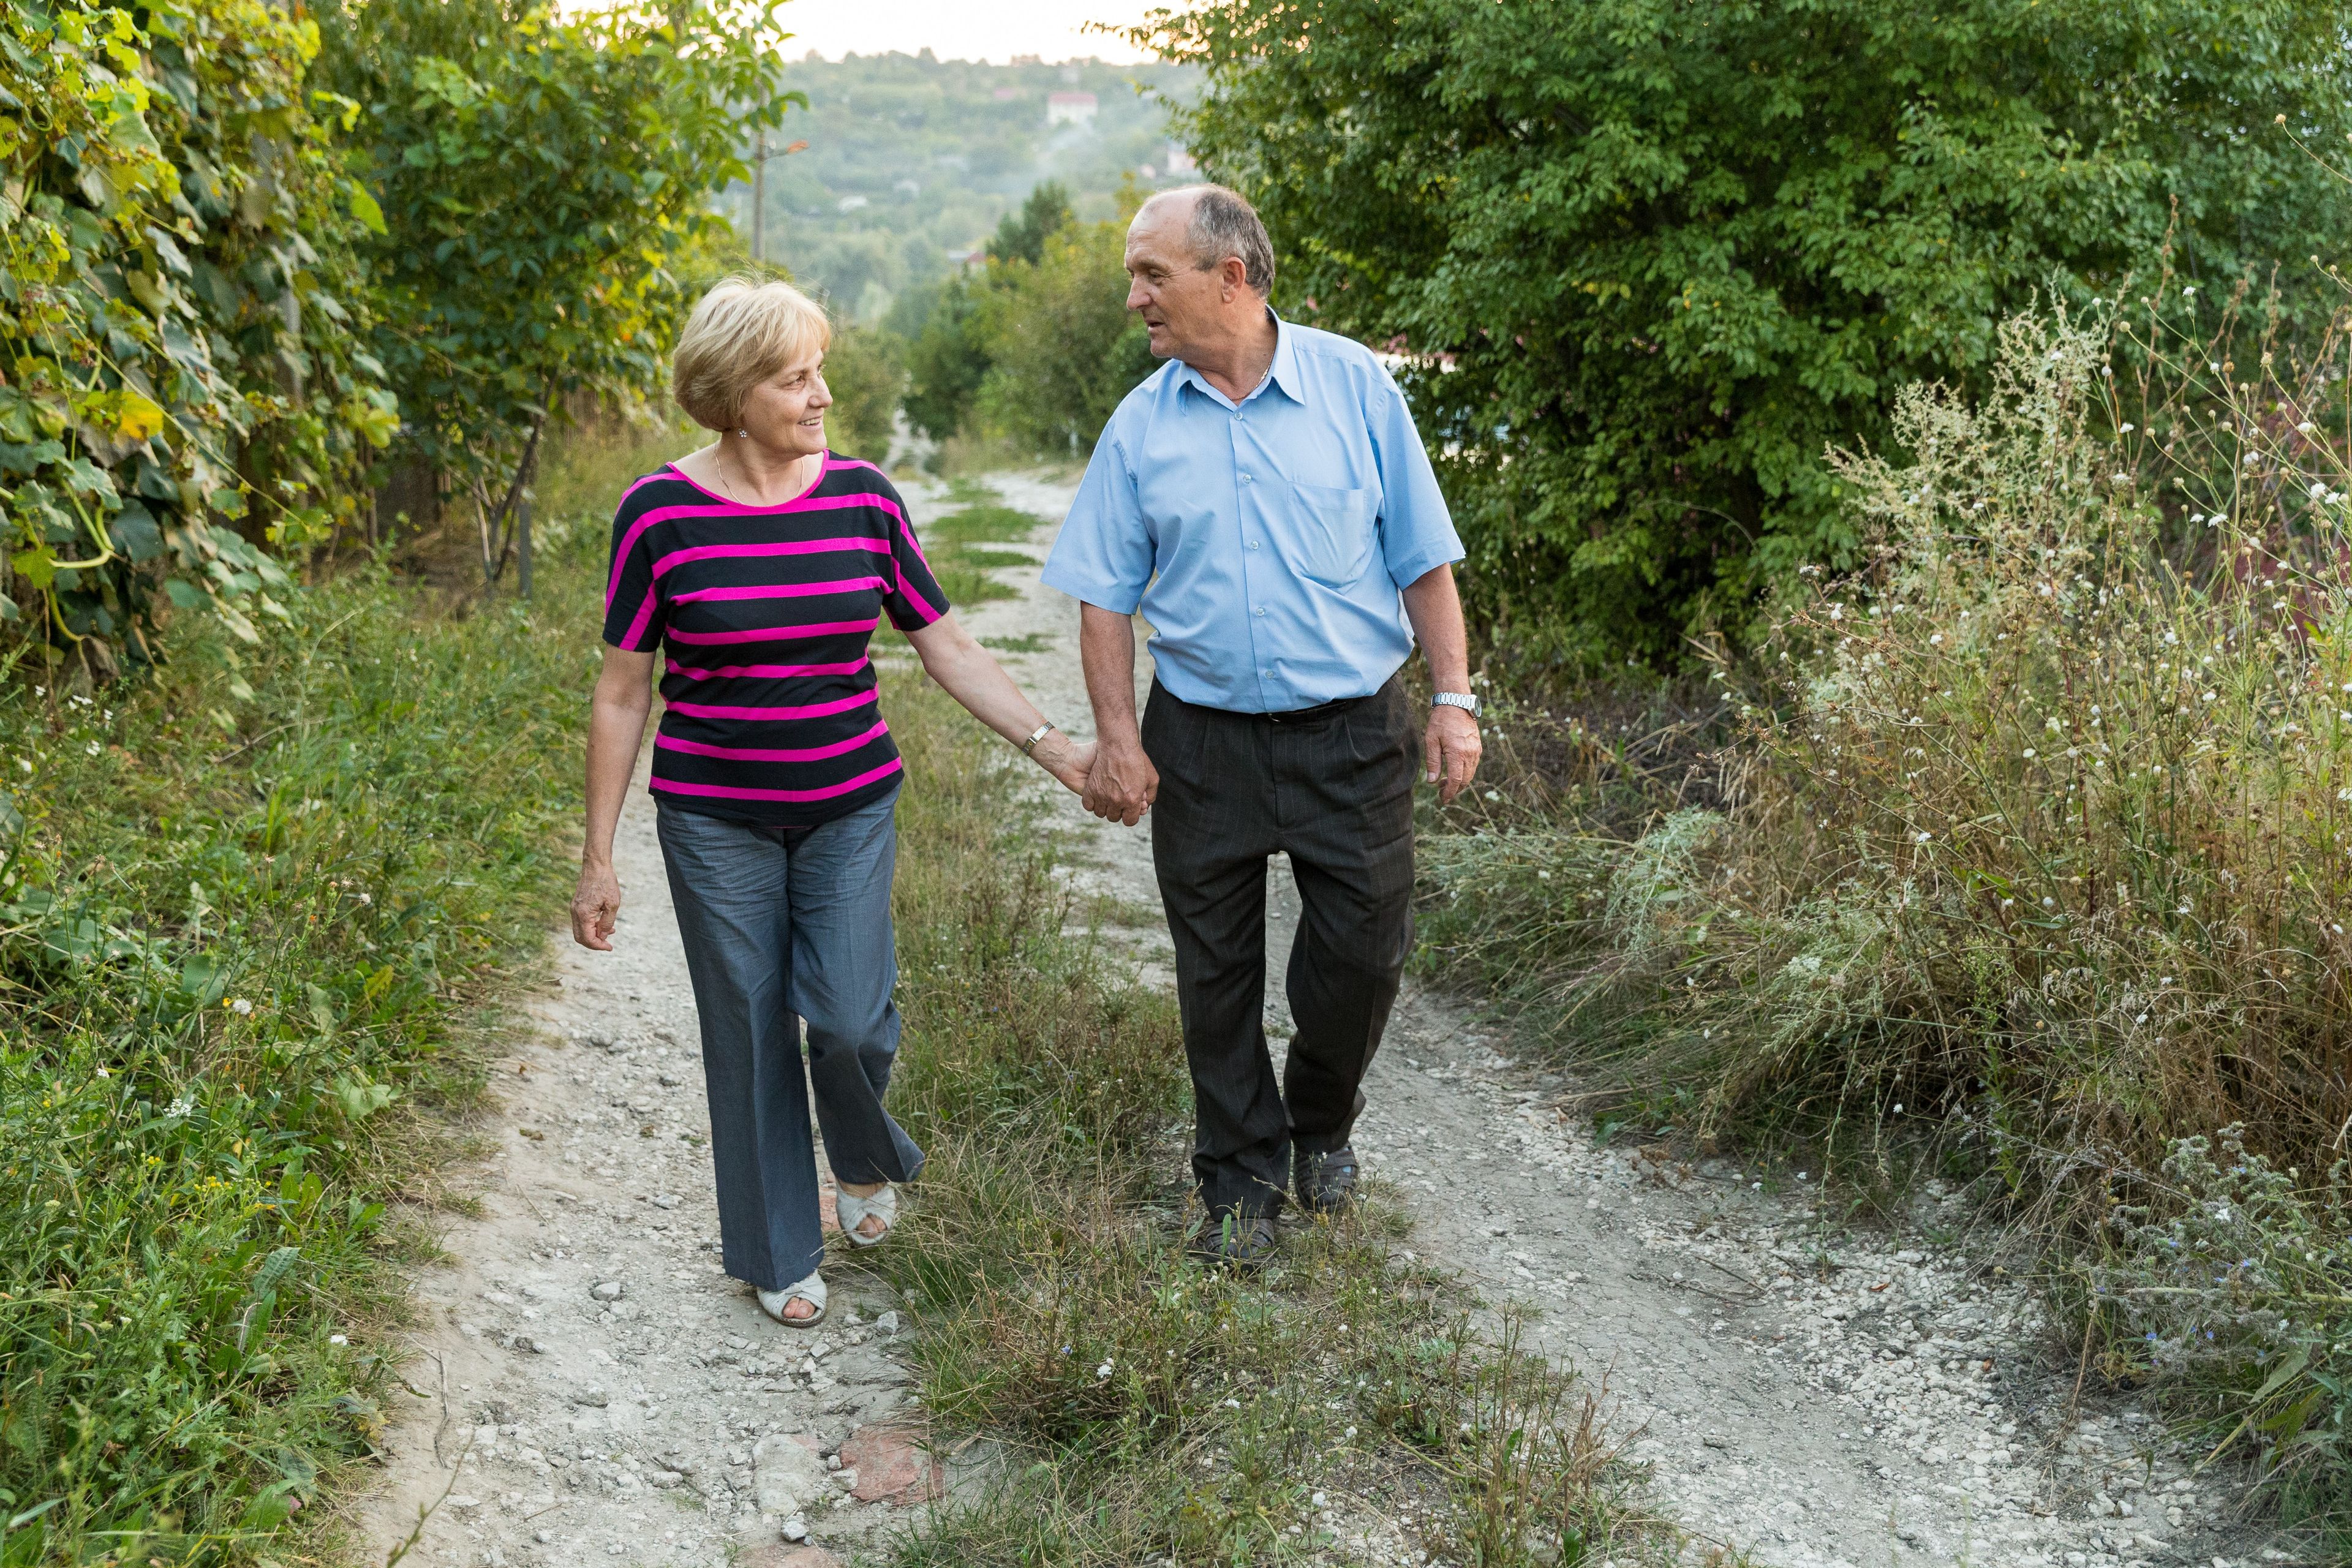 An elderly couple from Moldova holding hands and walking on a road together.